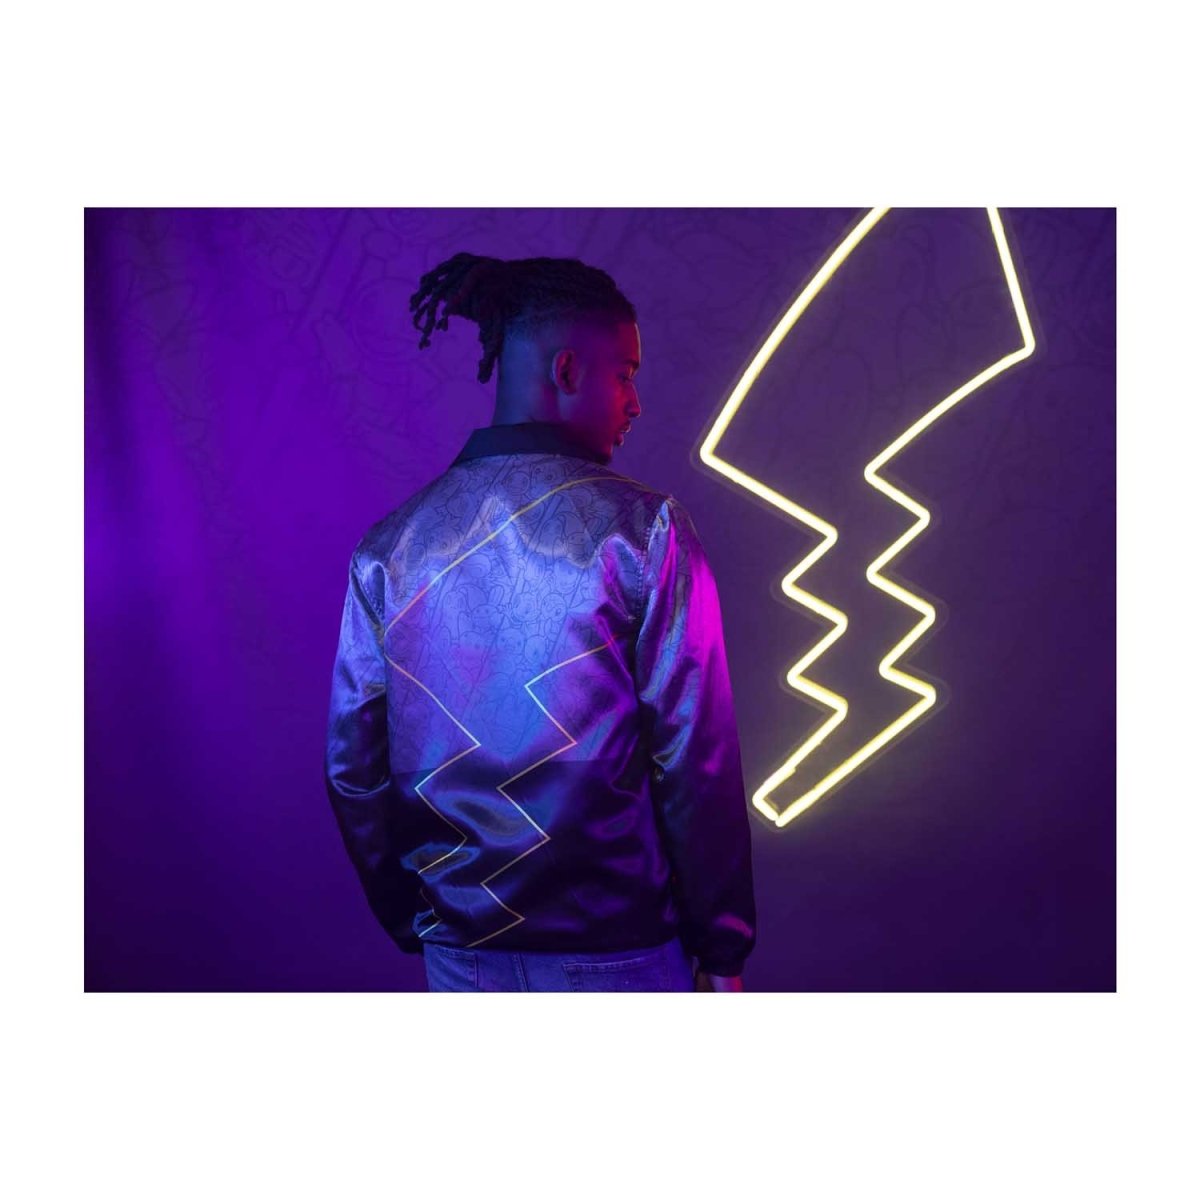 aim'n - NEW IN!! The Glow reversible jacket! ✨😍 • With a